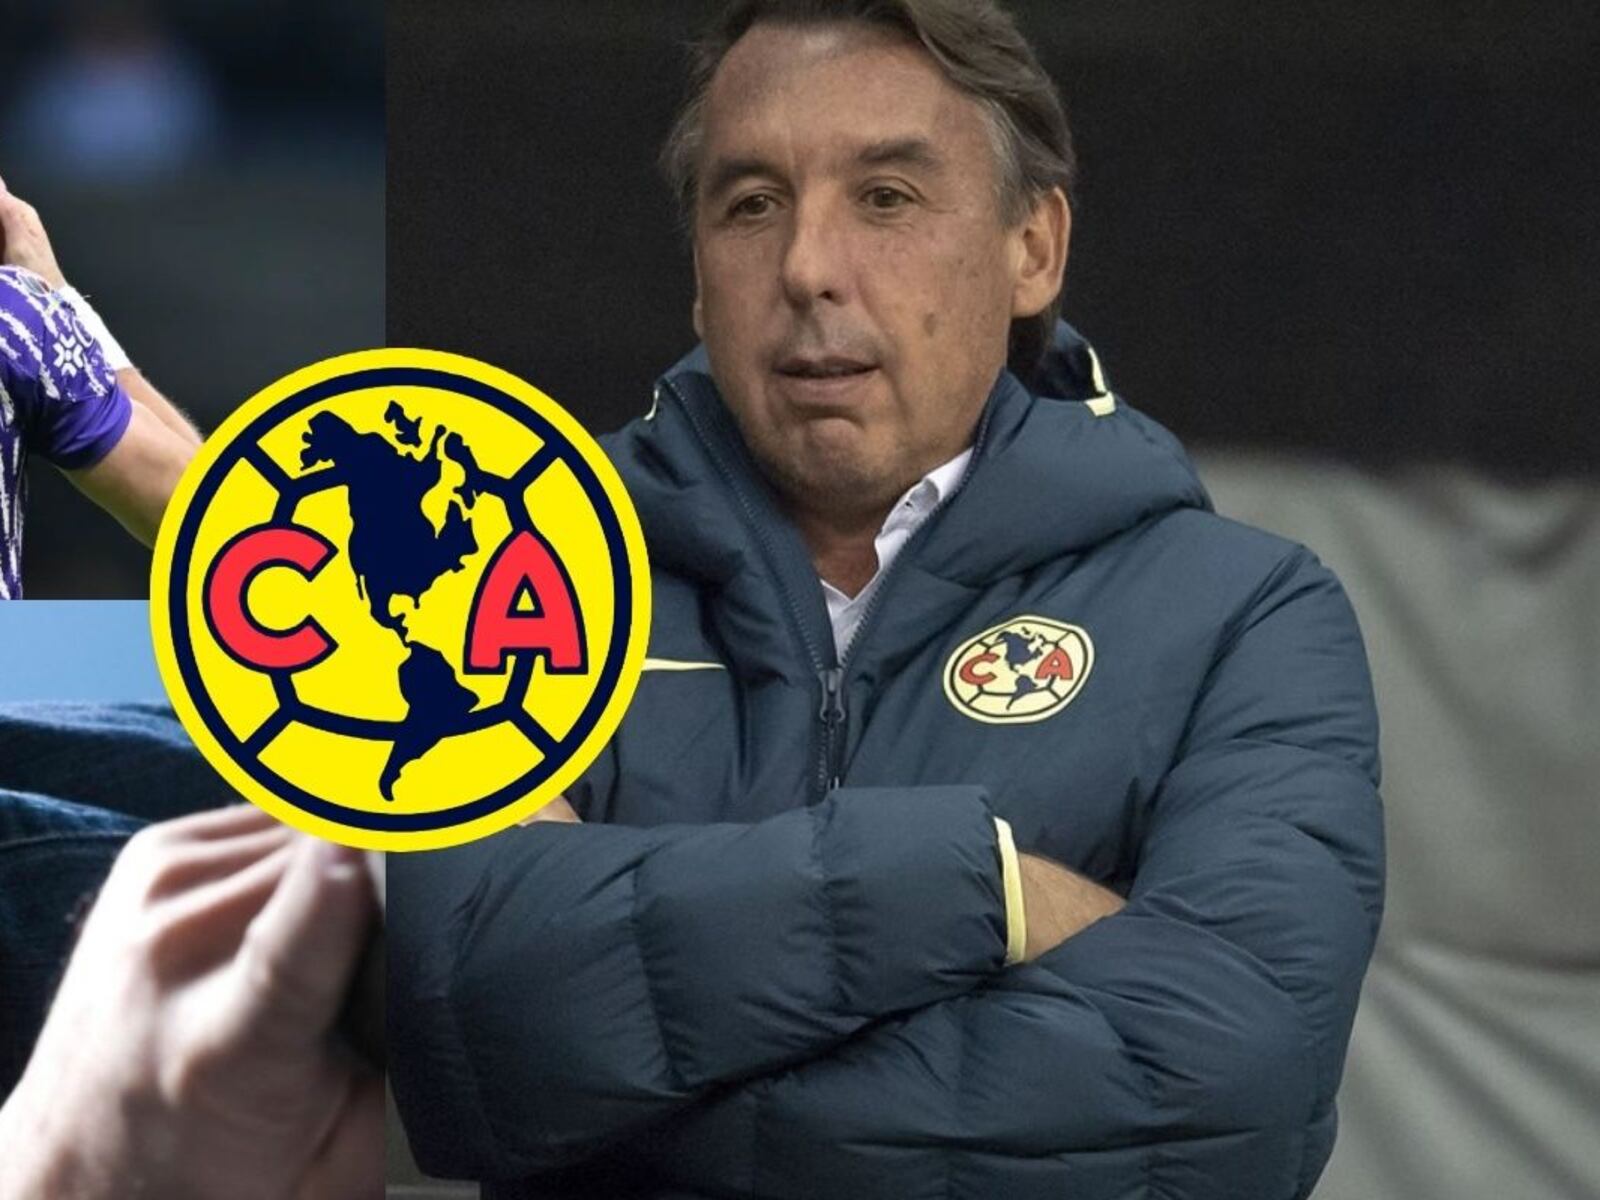 Is Jimenez leaving? The 3 casualties of América are confirmed after the defeat